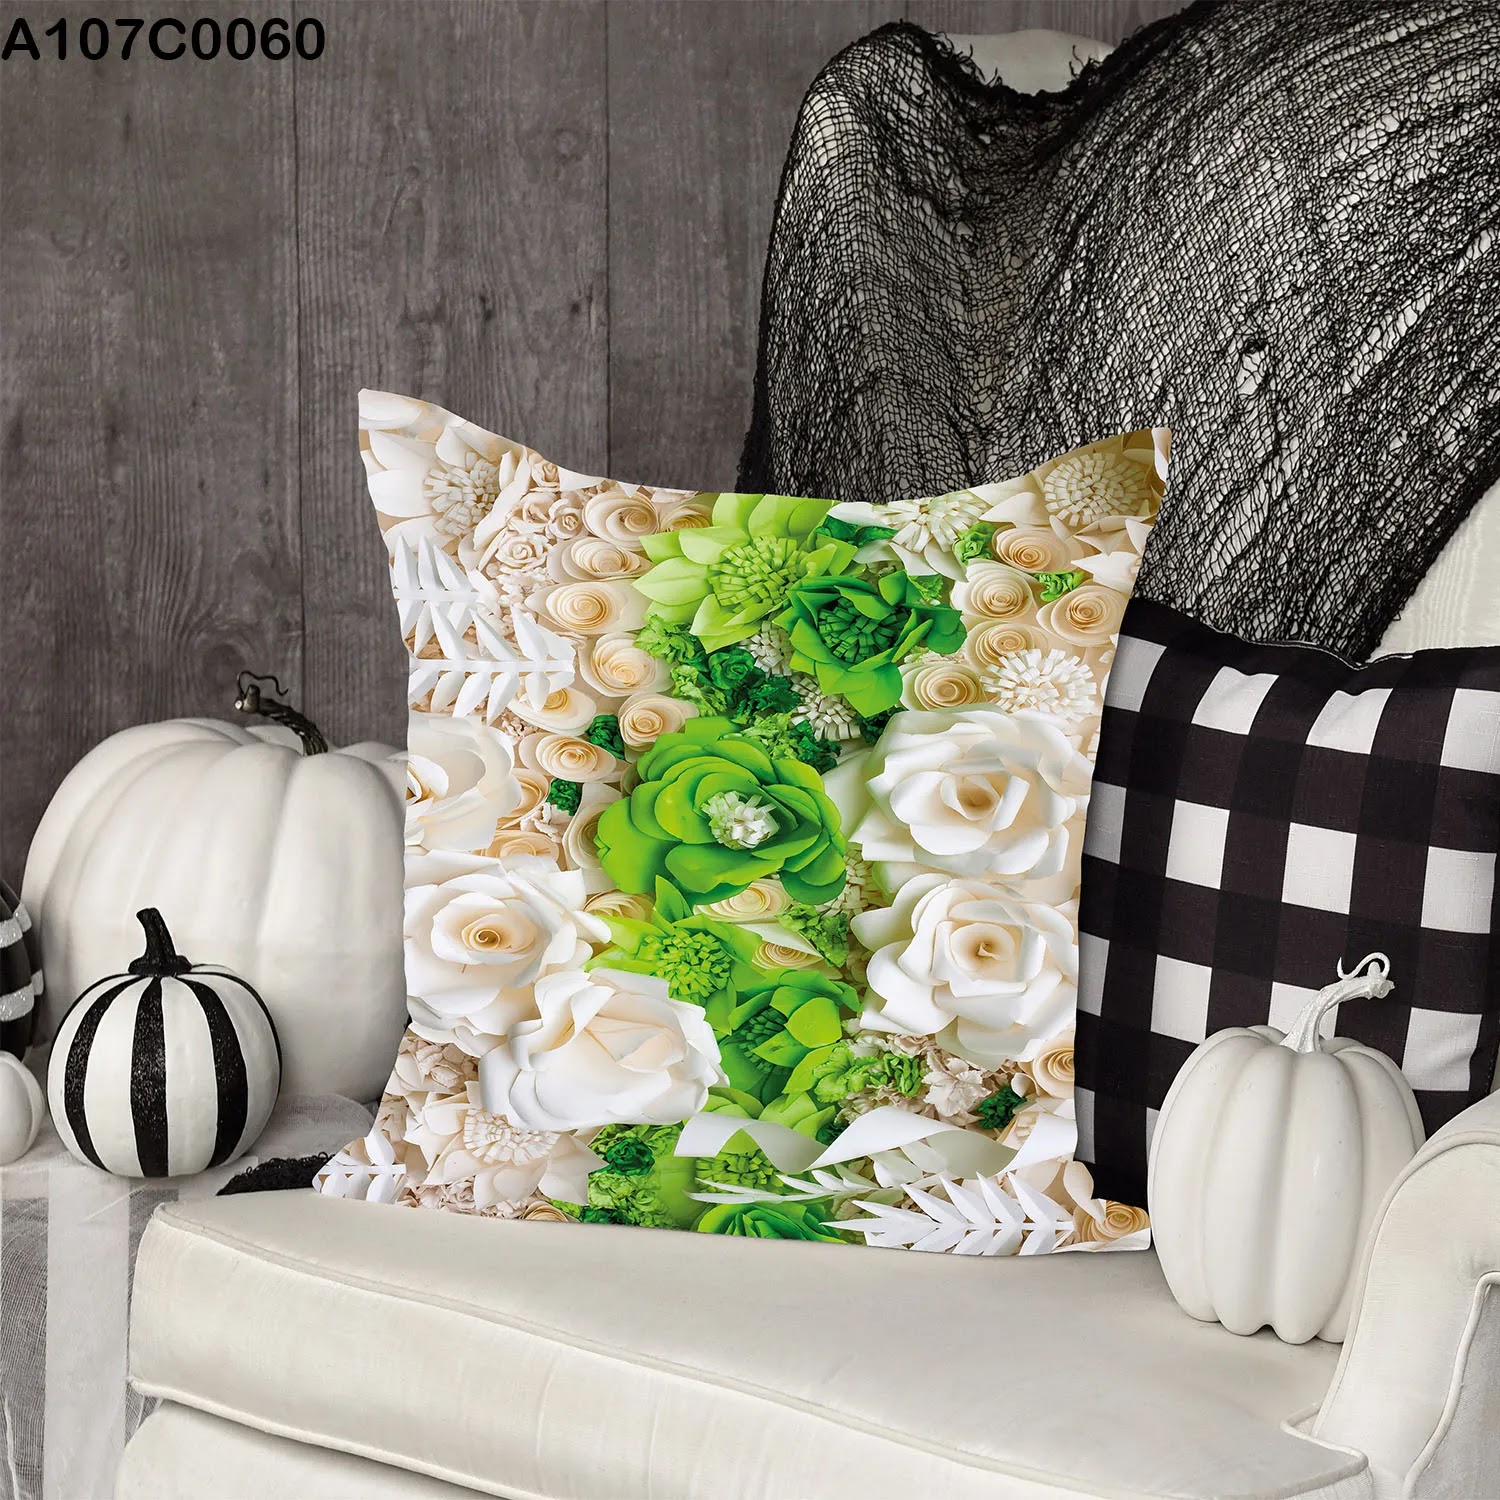 Pillow case with white and green roses